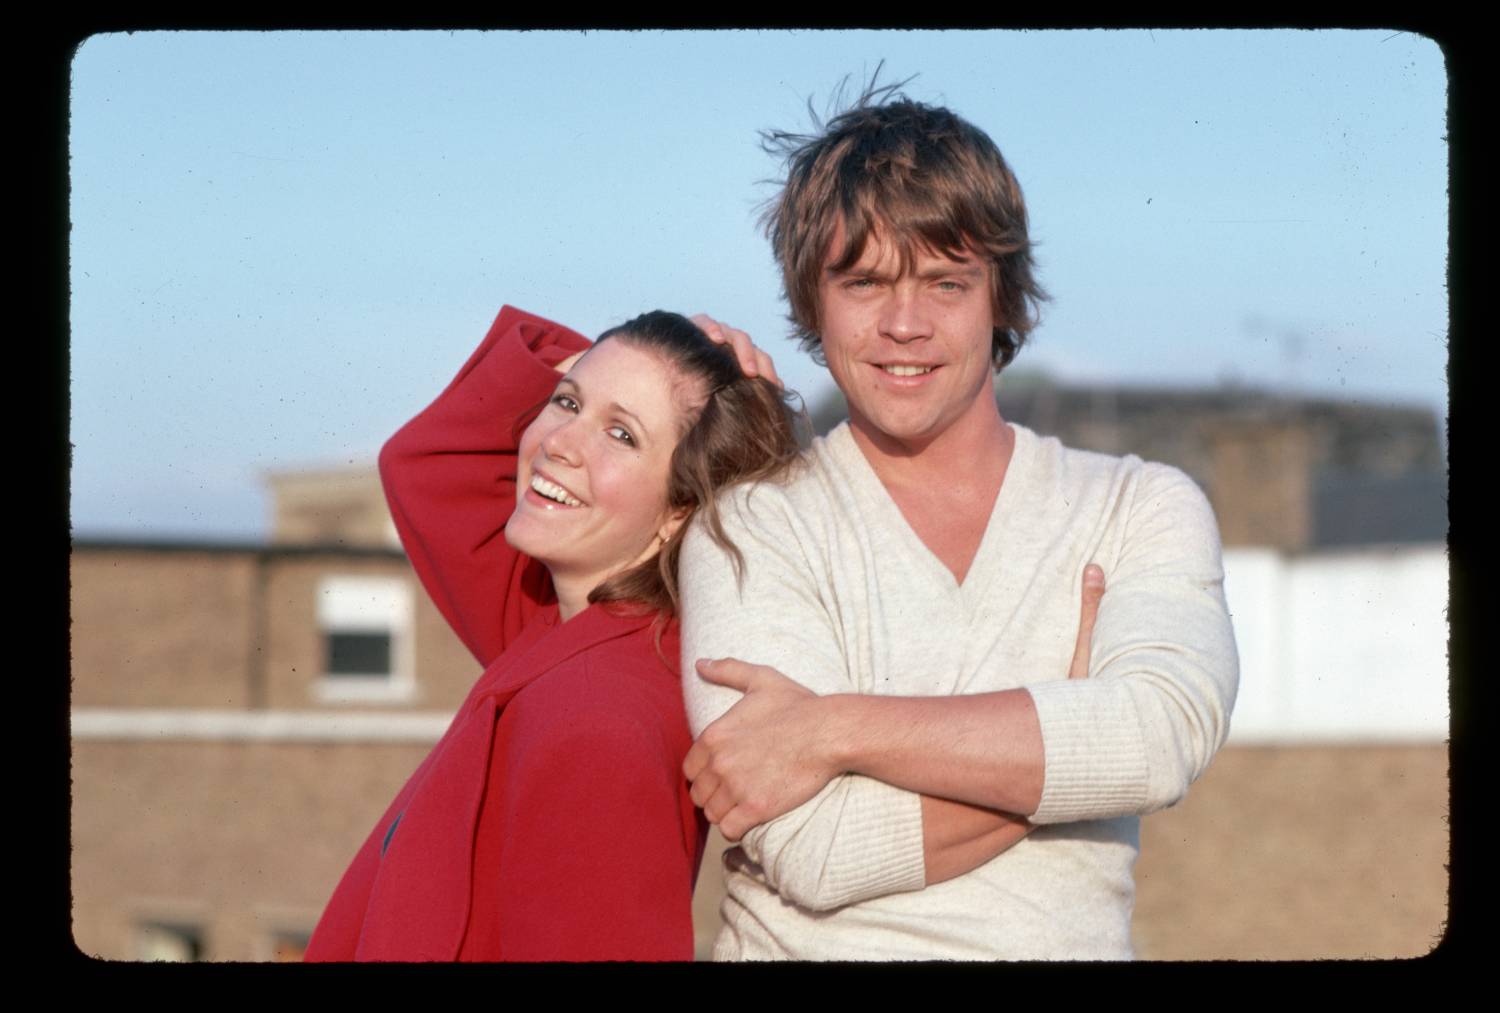 Star Wars trilogy costars Mark Hamill and Carrie Fisher